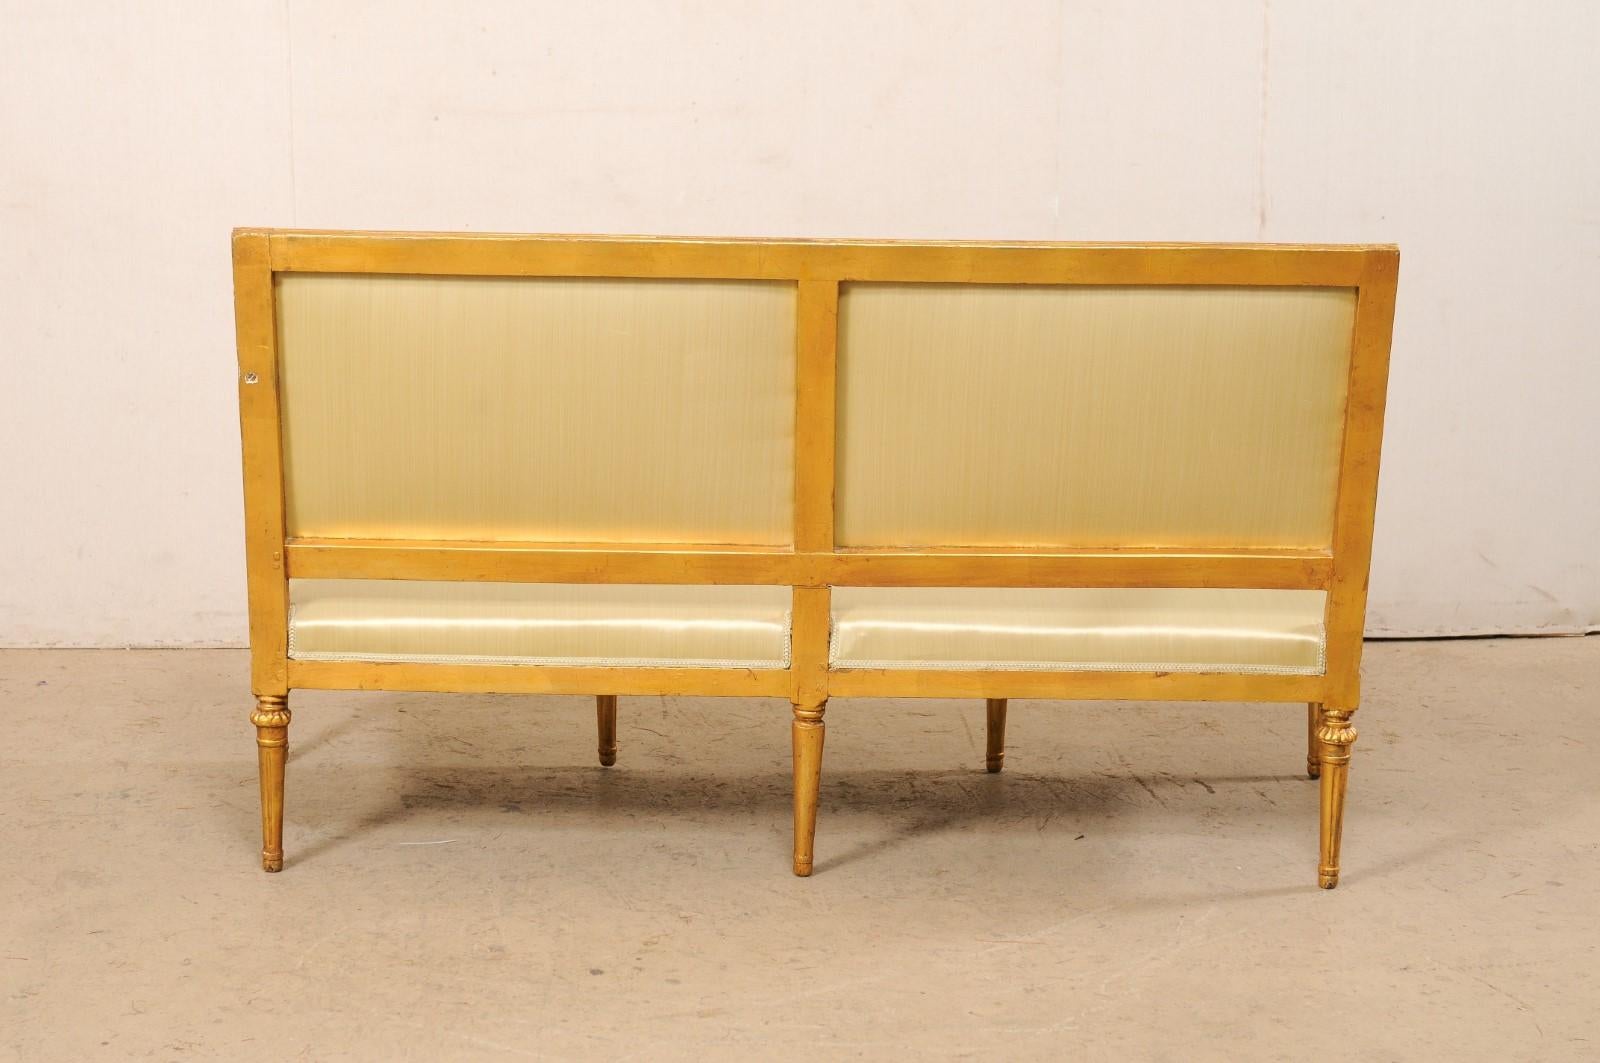 Swedish Neoclassical Style Carved Gilt-Wood & Upholstered Sofa Bench, 19th C. For Sale 2